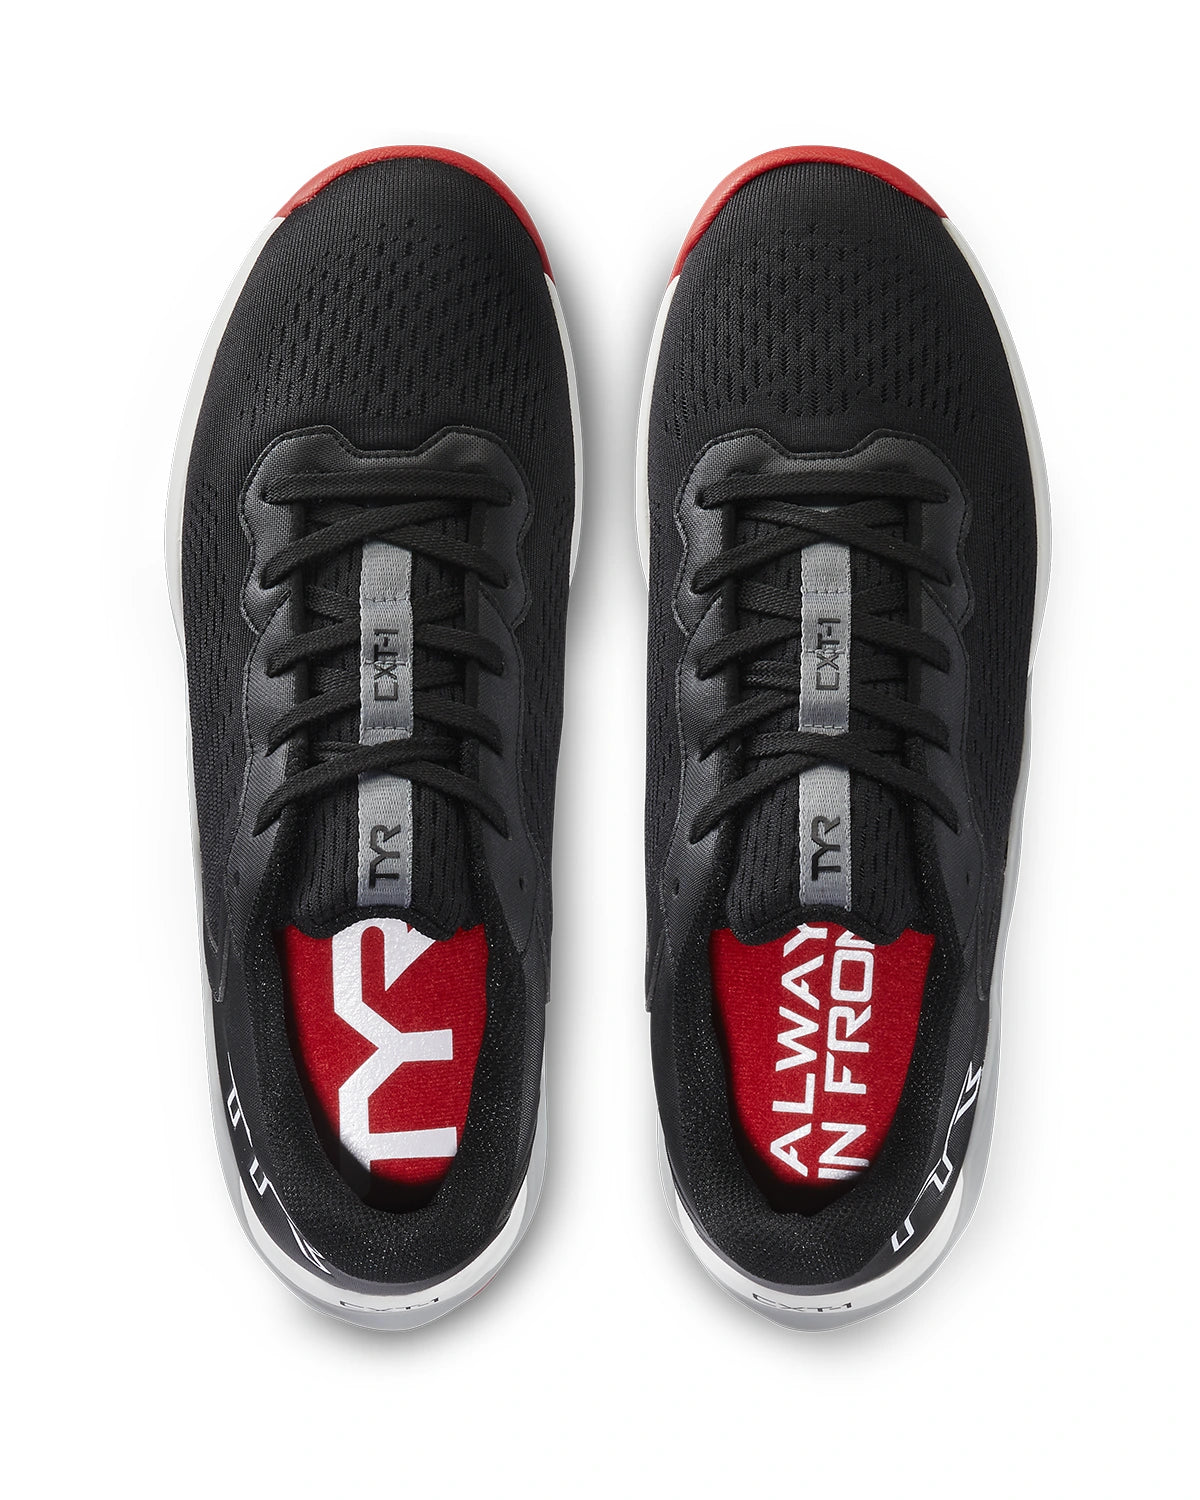 TYR CXT-1 Trainer (Black/Red)